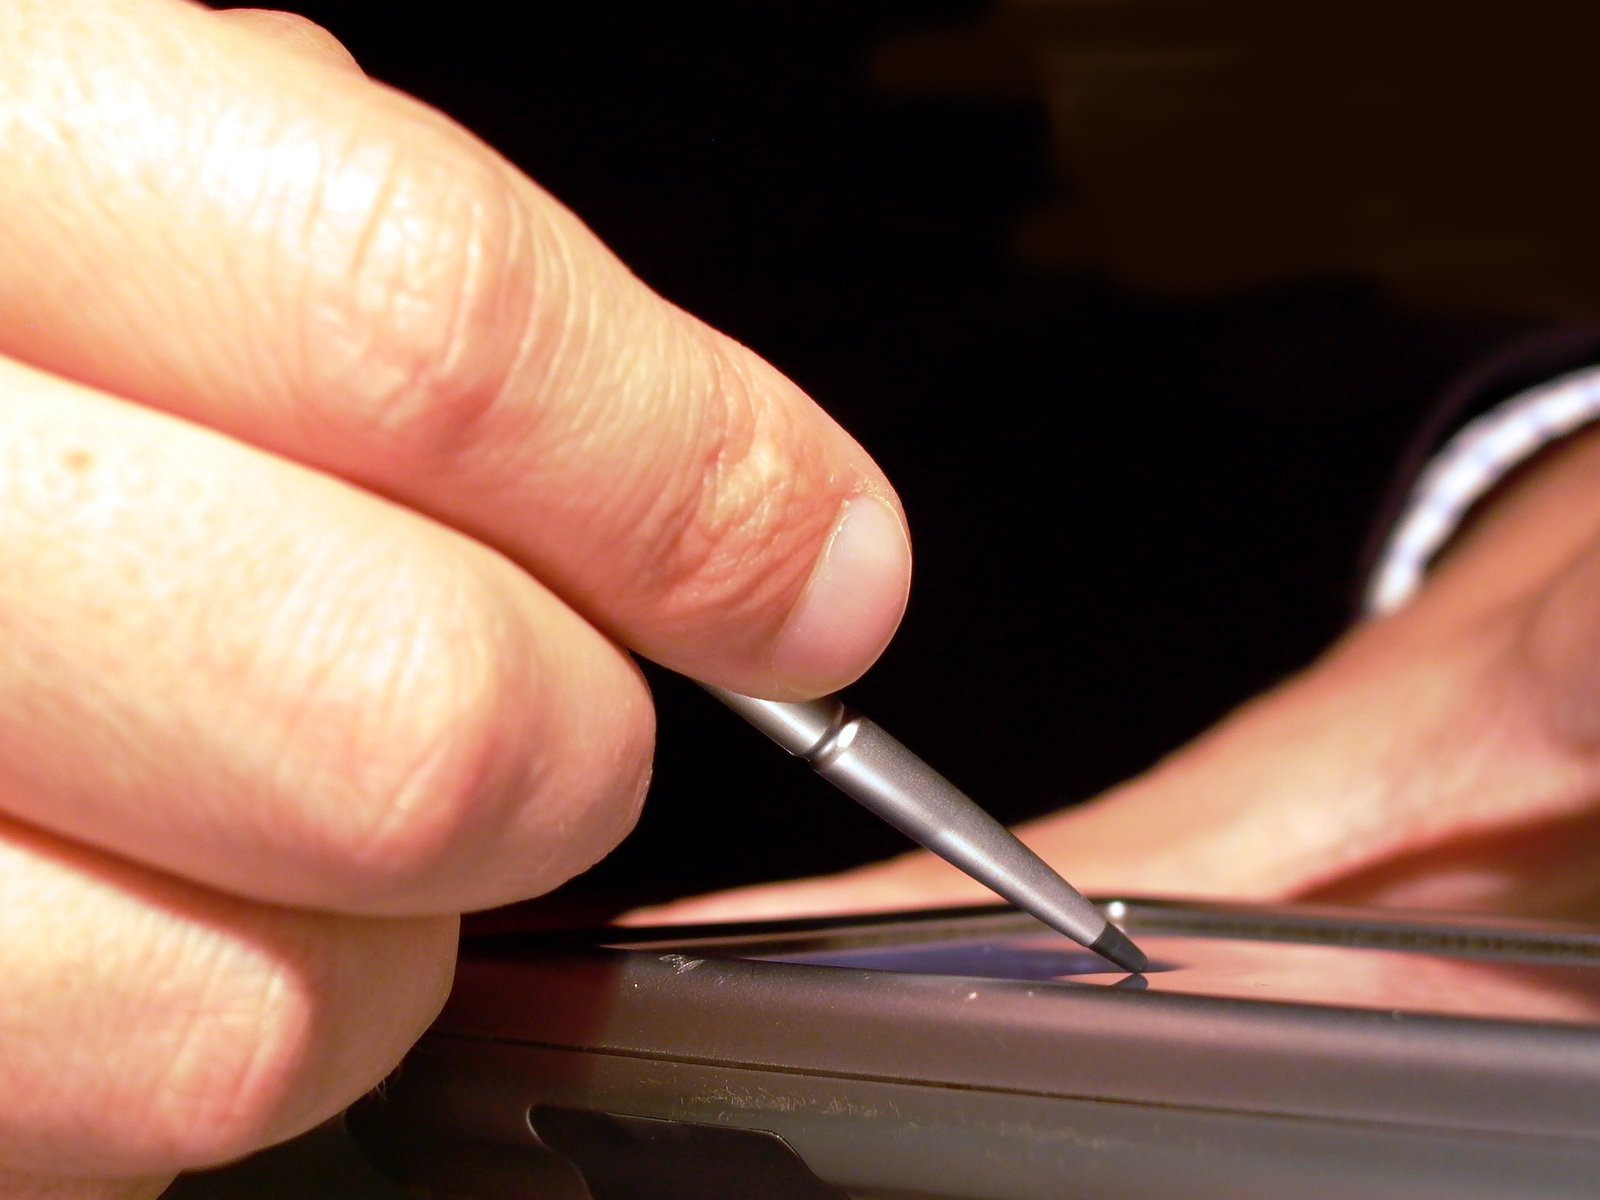 a hand is holding a pen in the process of removing a screen from a laptop